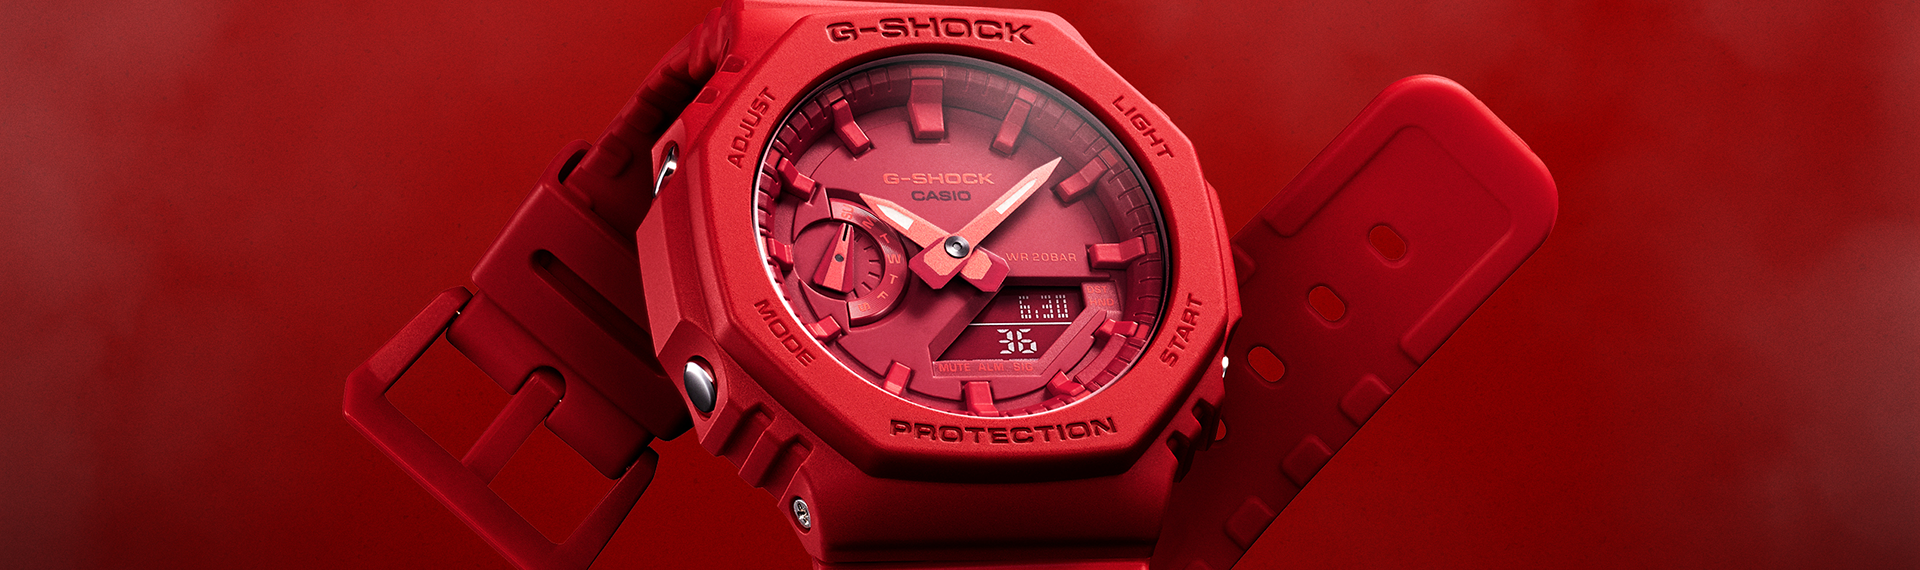 About the G-Shock Brand